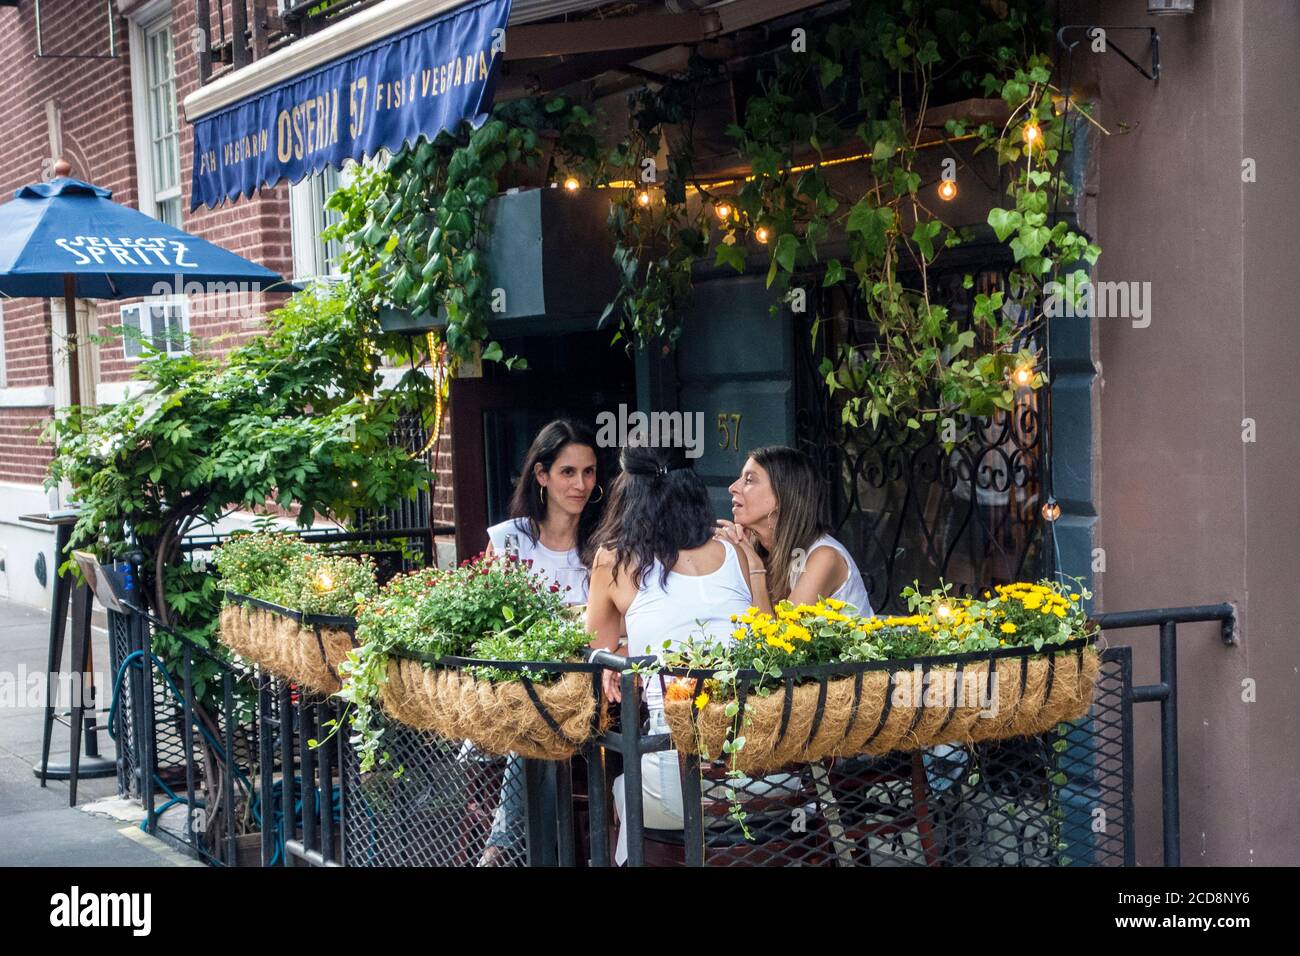 Outdoor seating during the Covid 19 pandemic at Osteria 57 Restaurant on 10th Street in Greenwich Village, New York City, NY, USA Stock Photo